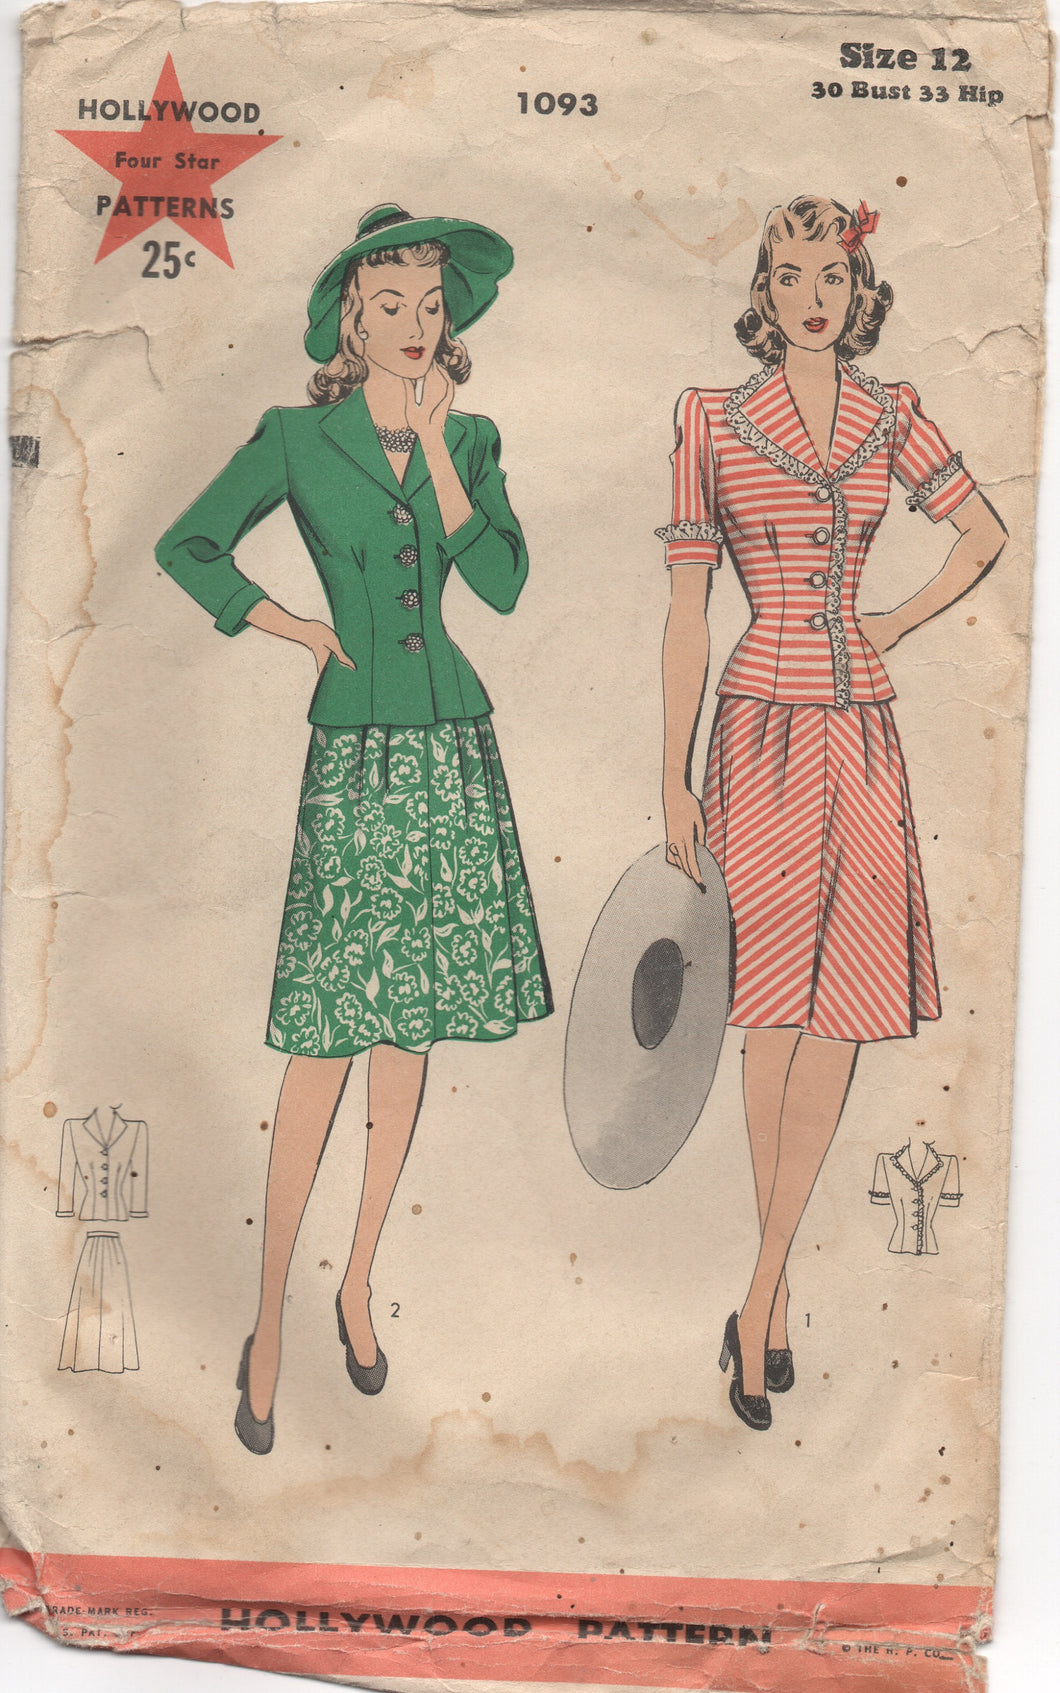 Wartime 1940's Hollywood Two Piece Dress with Short Sleeves and Flared Skirt - Bust 30